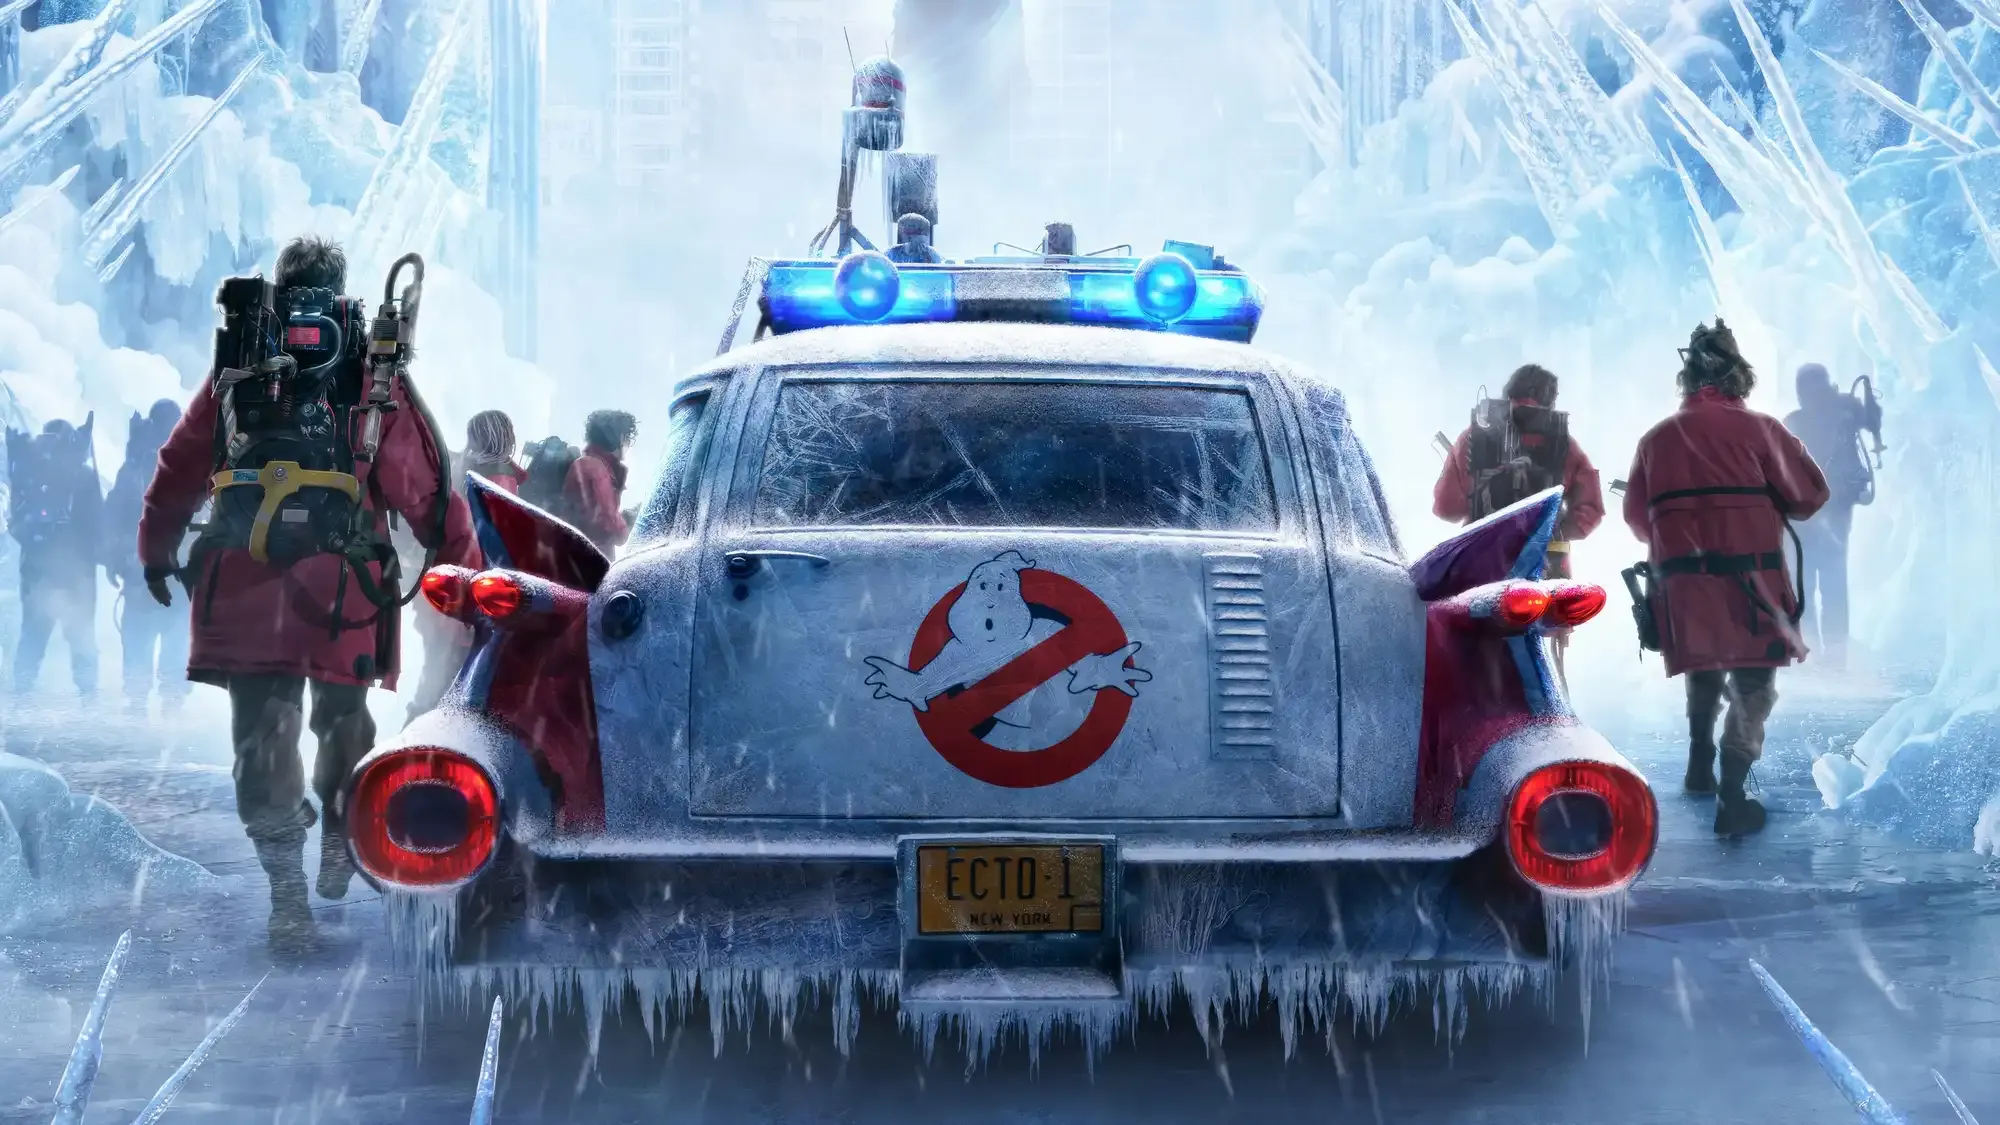 Ghostbusters: Frozen Empire movie review